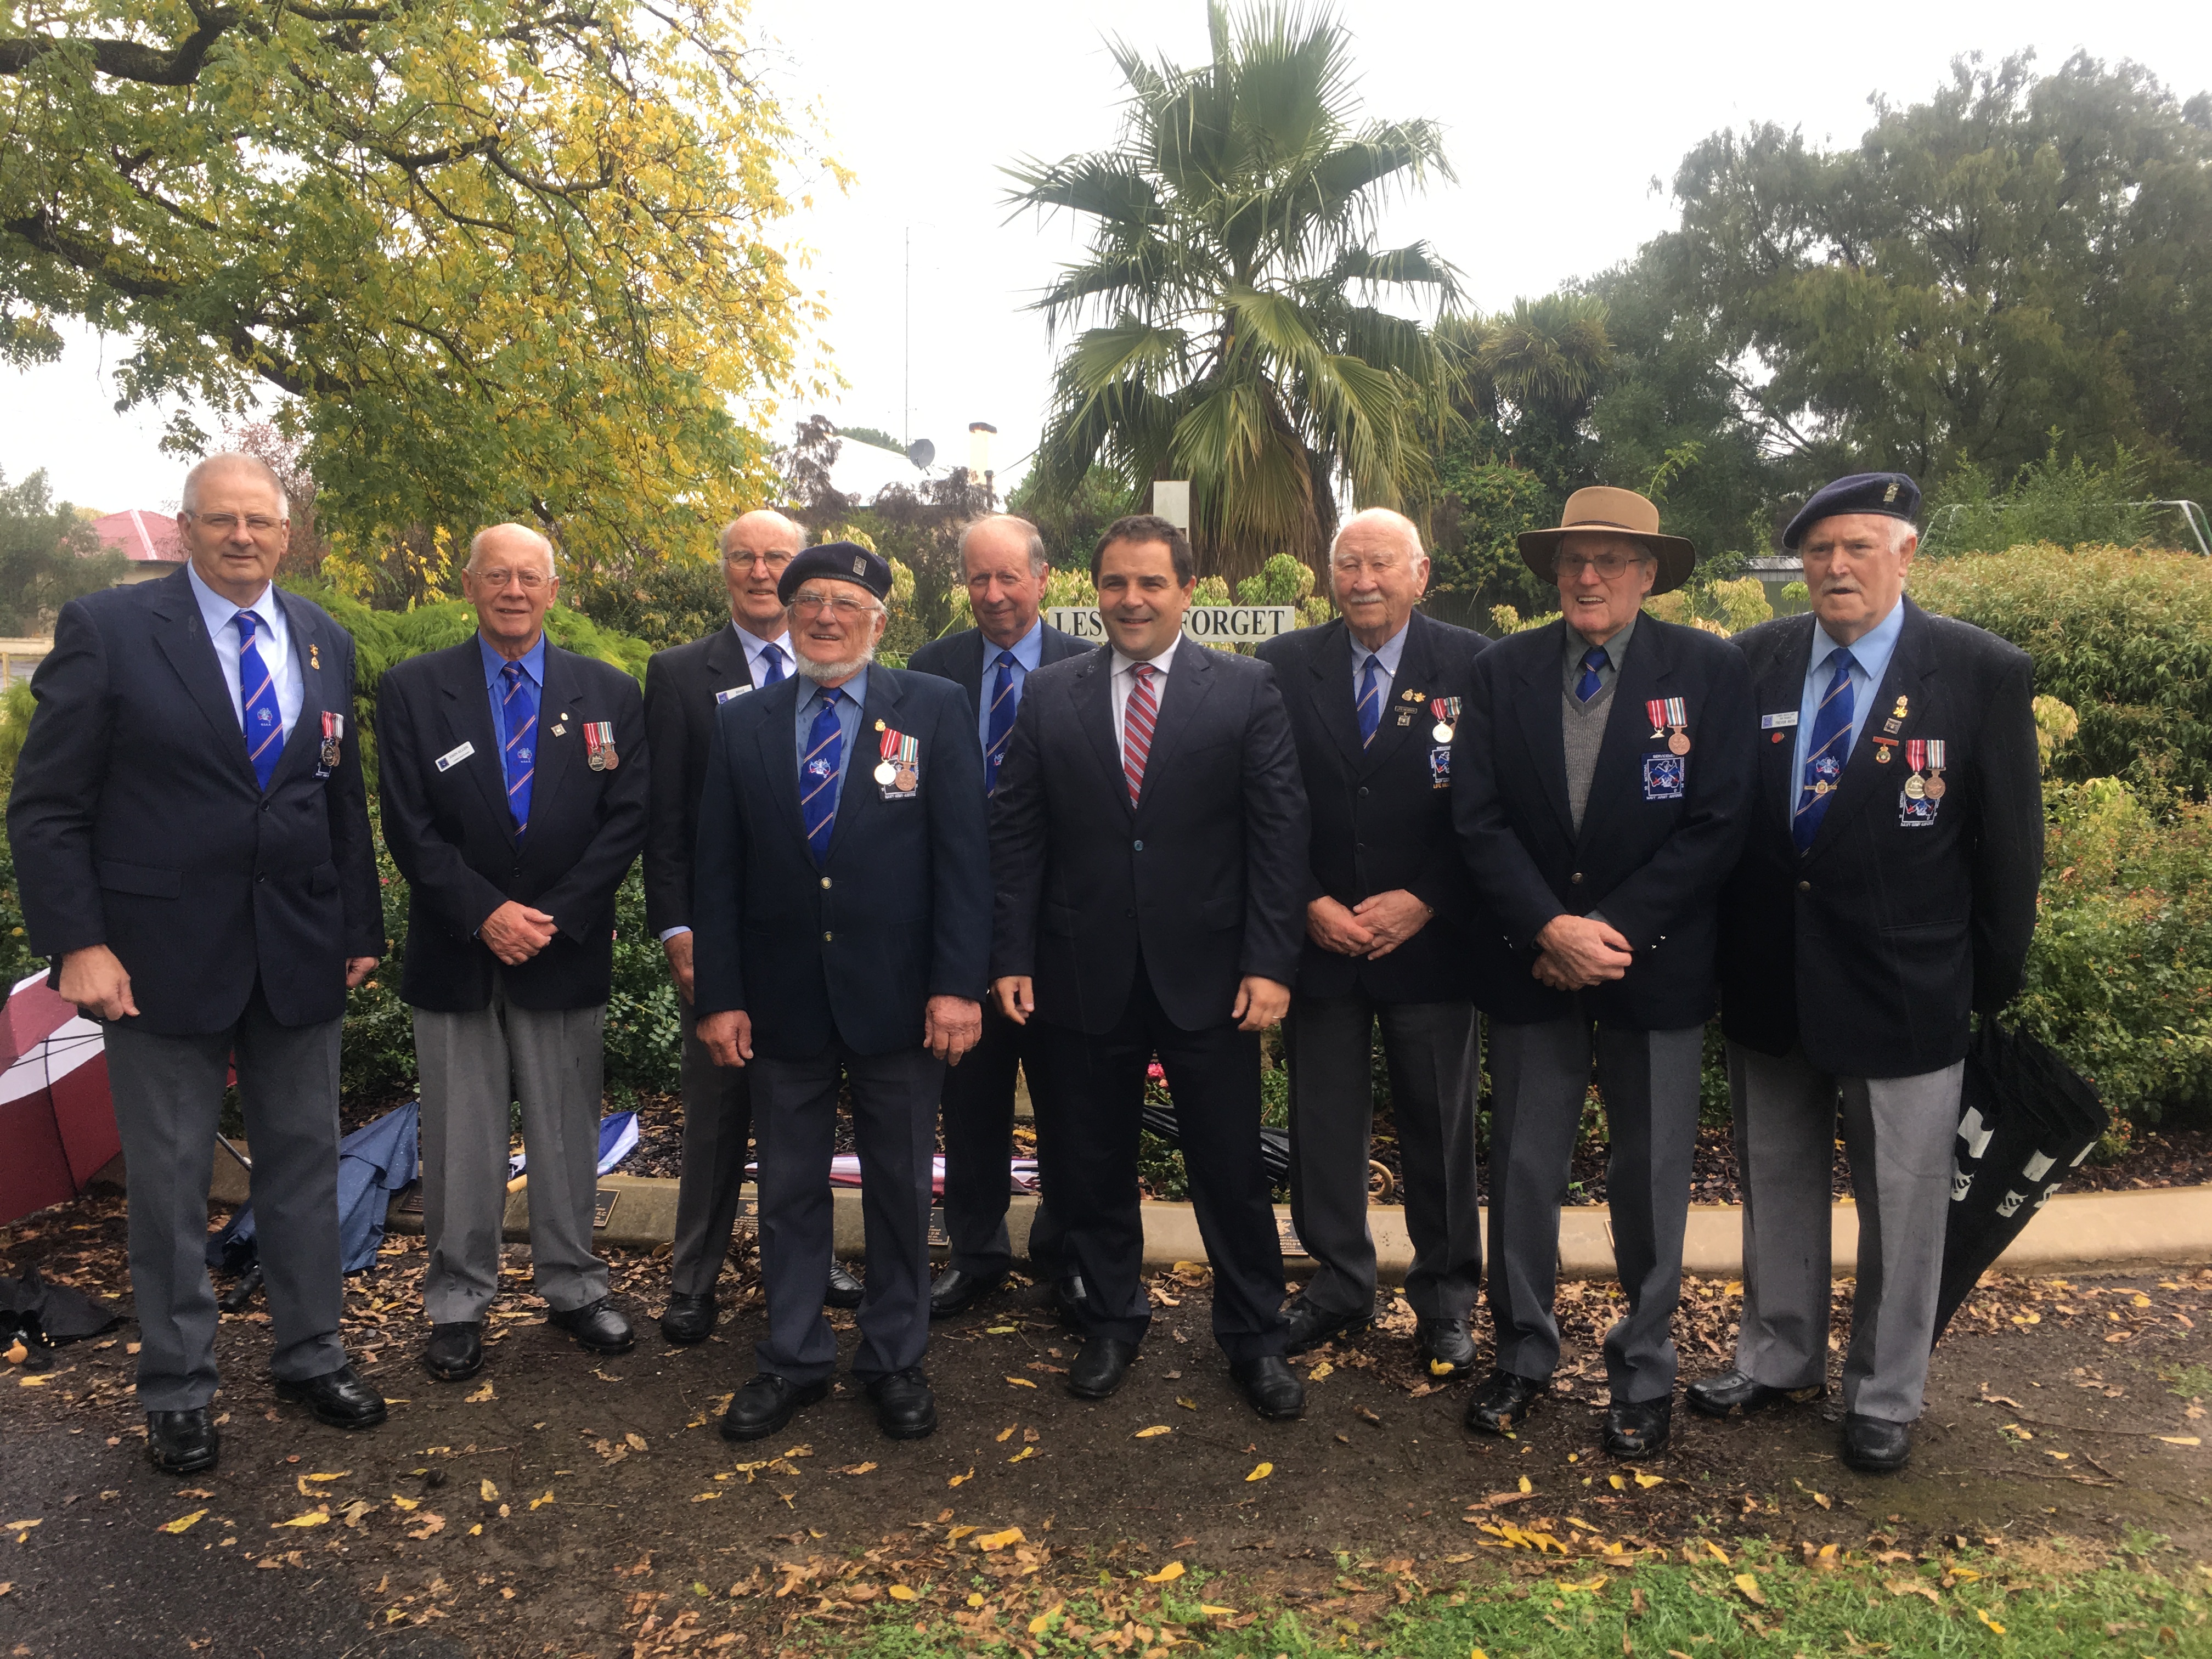 Grants available for supporting Barker Veterans